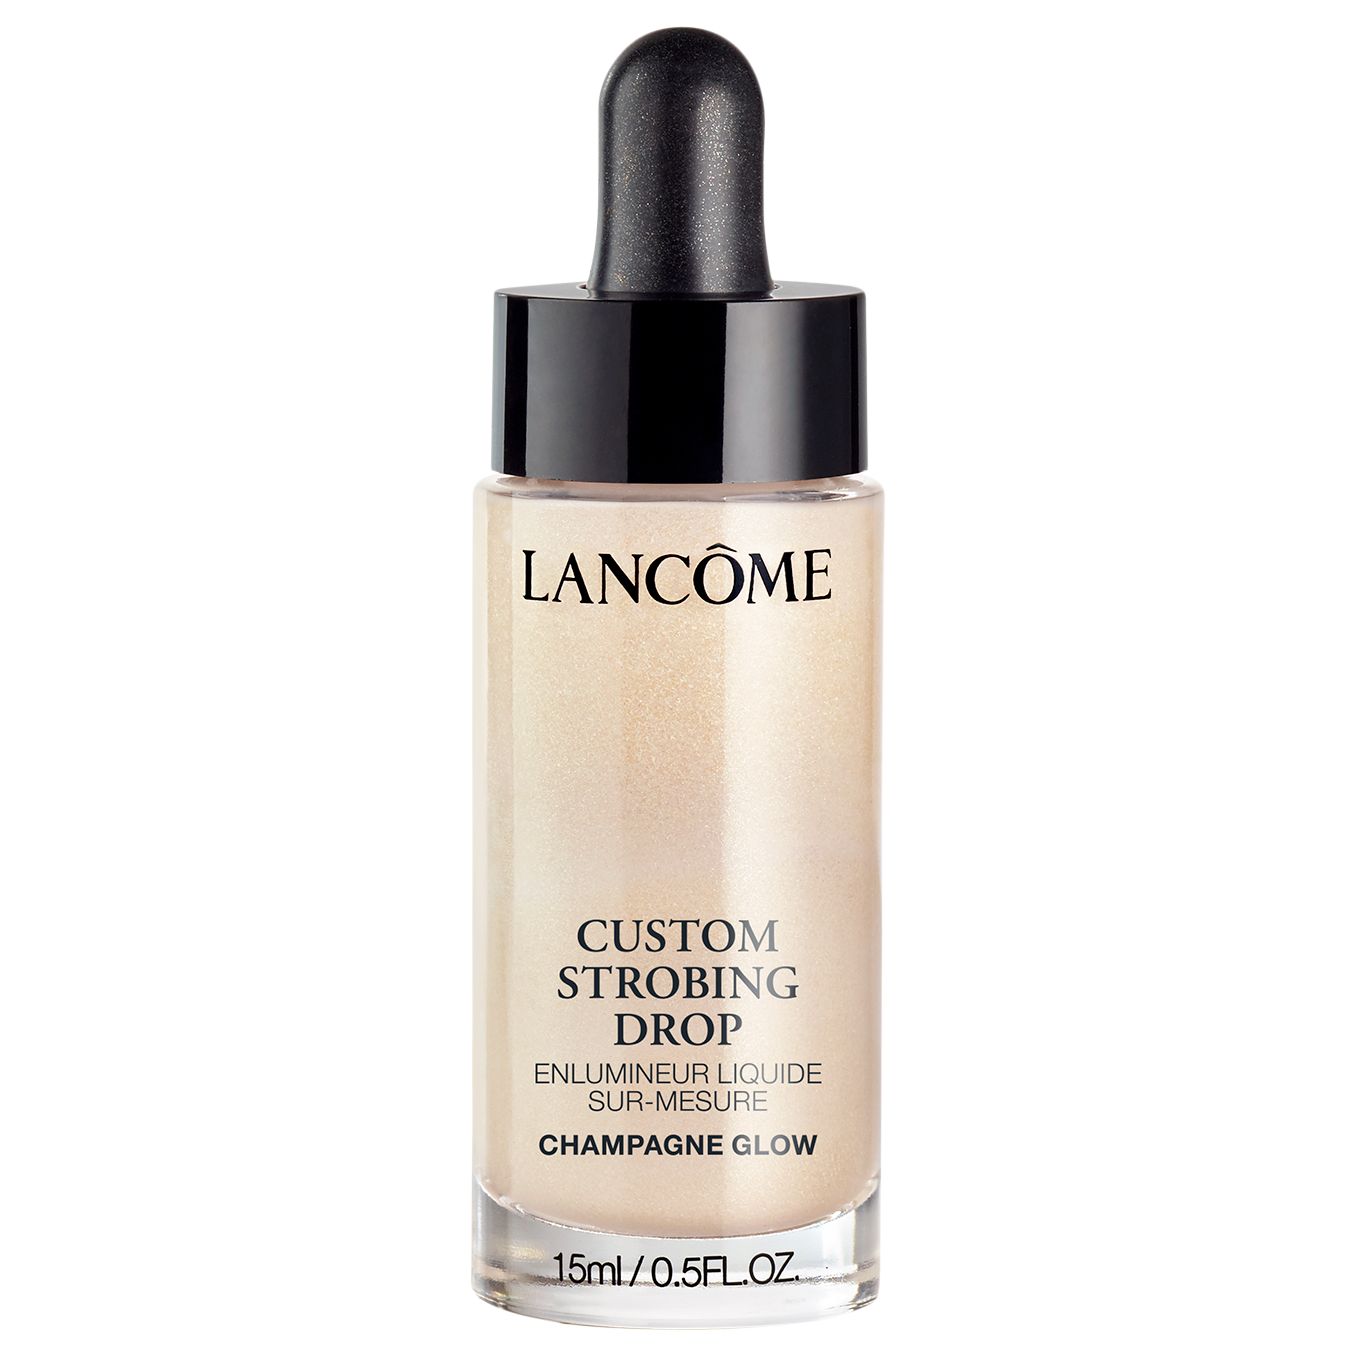 Image result for Lancôme Custom Strobing Drop in Champagne Glow